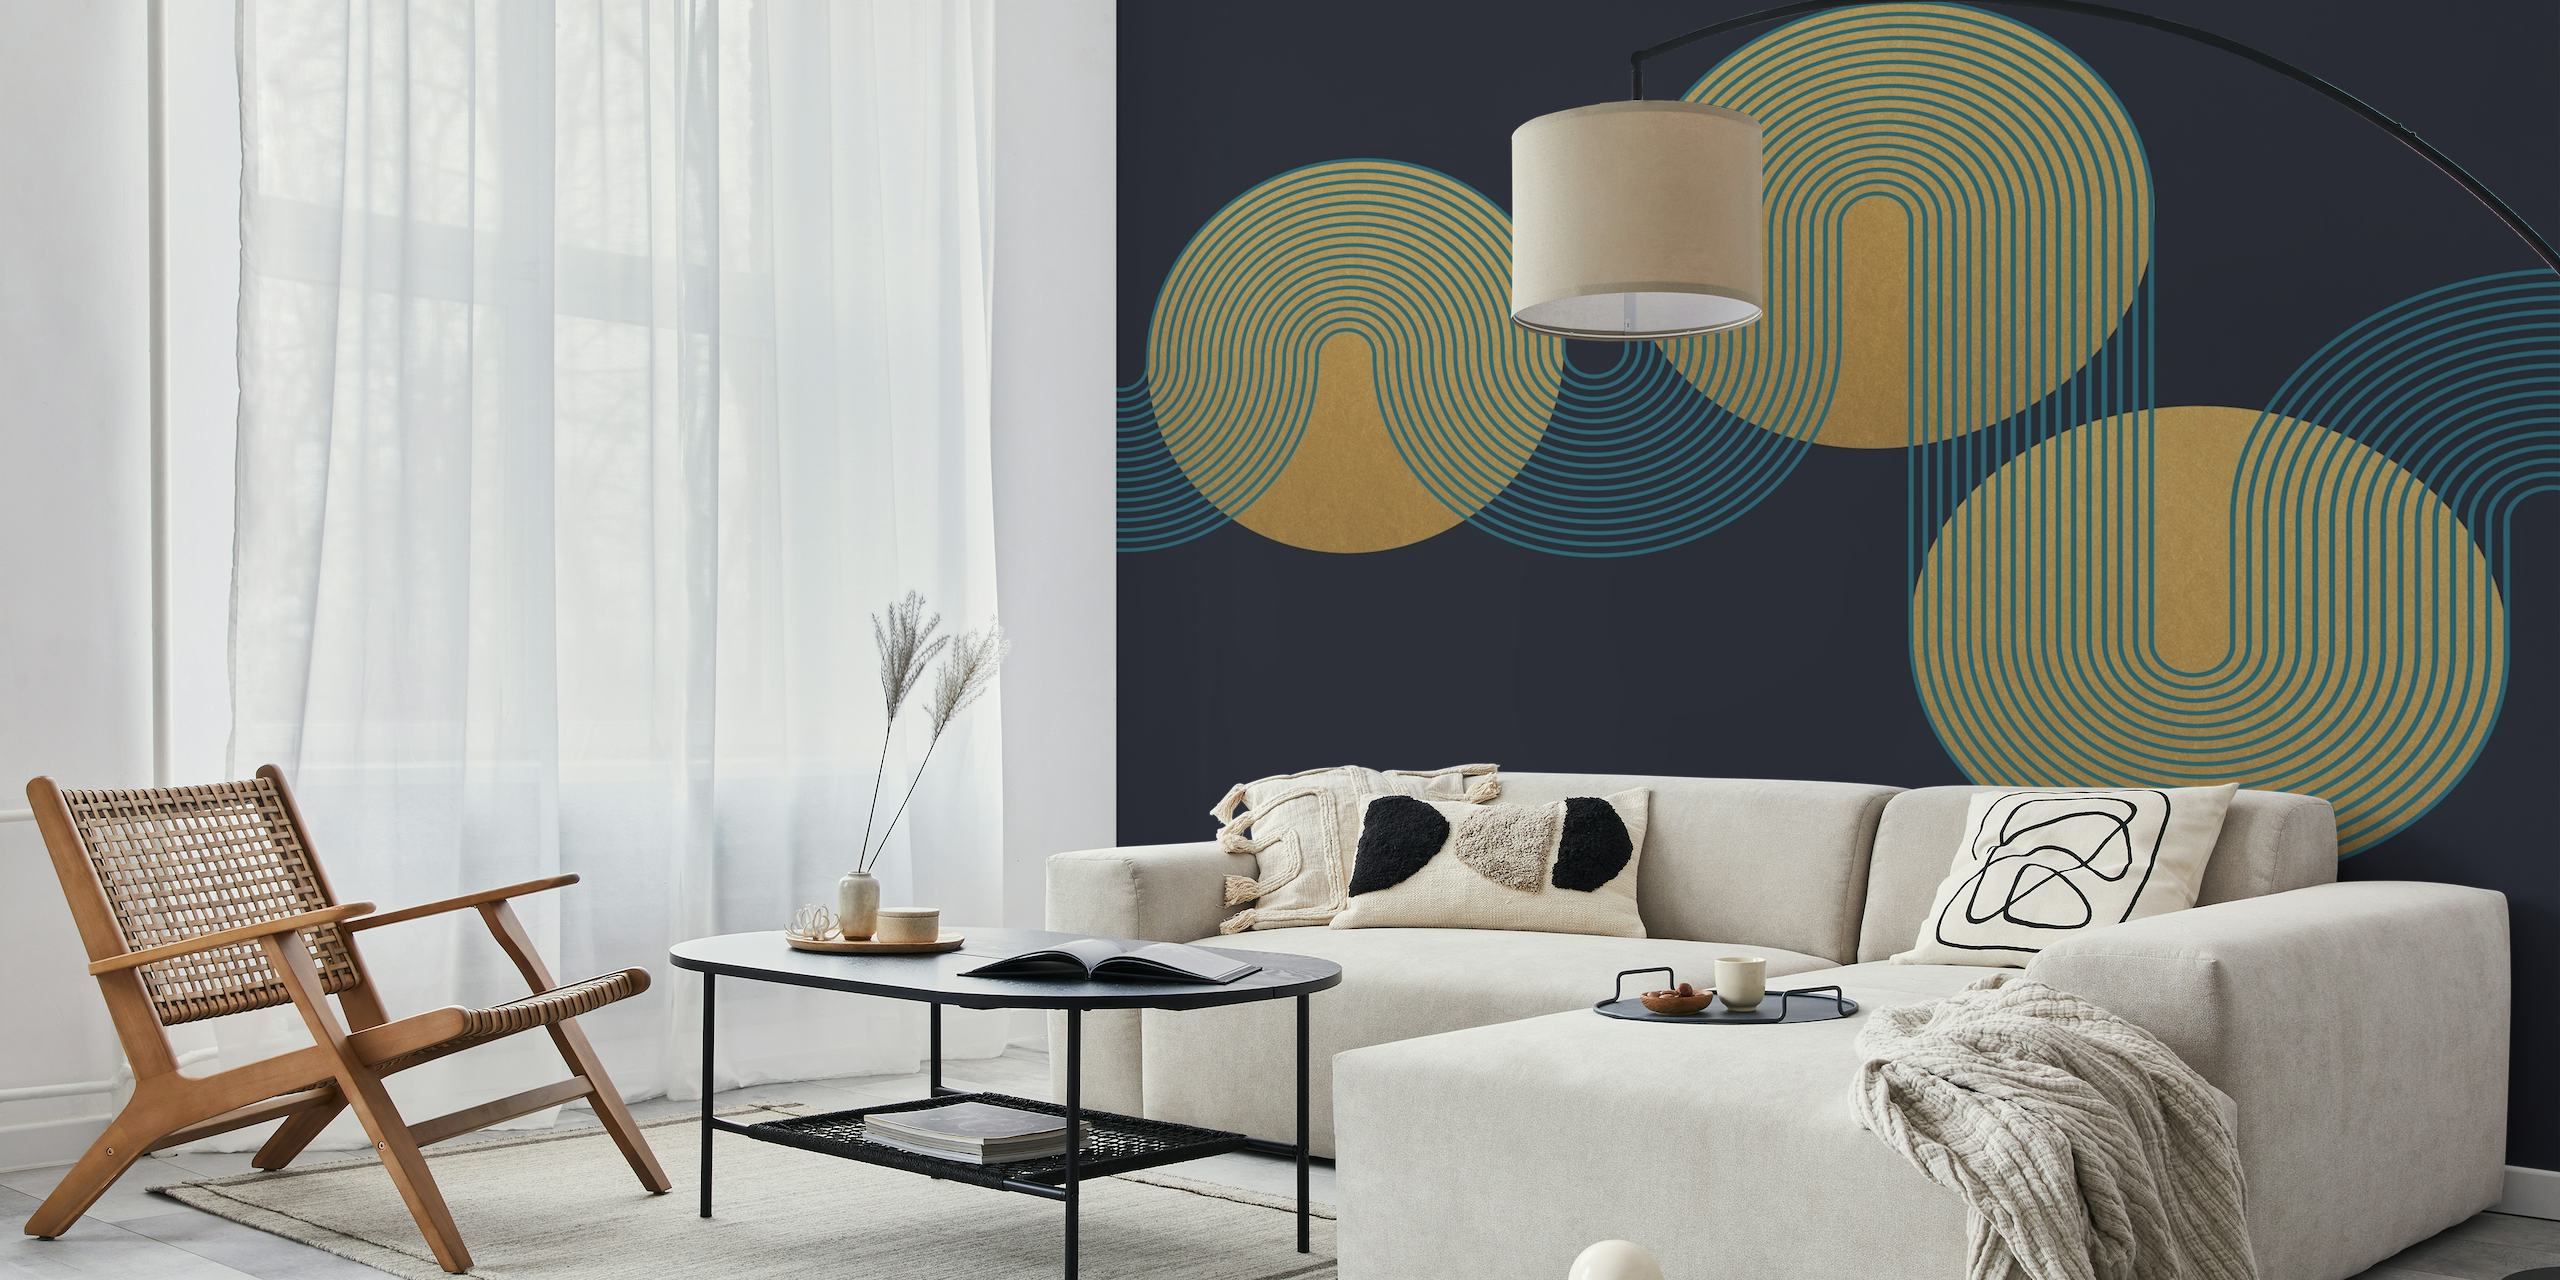 Bauhaus-inspired abstract wall mural with overlapping circles in golden and beige tones on a navy background